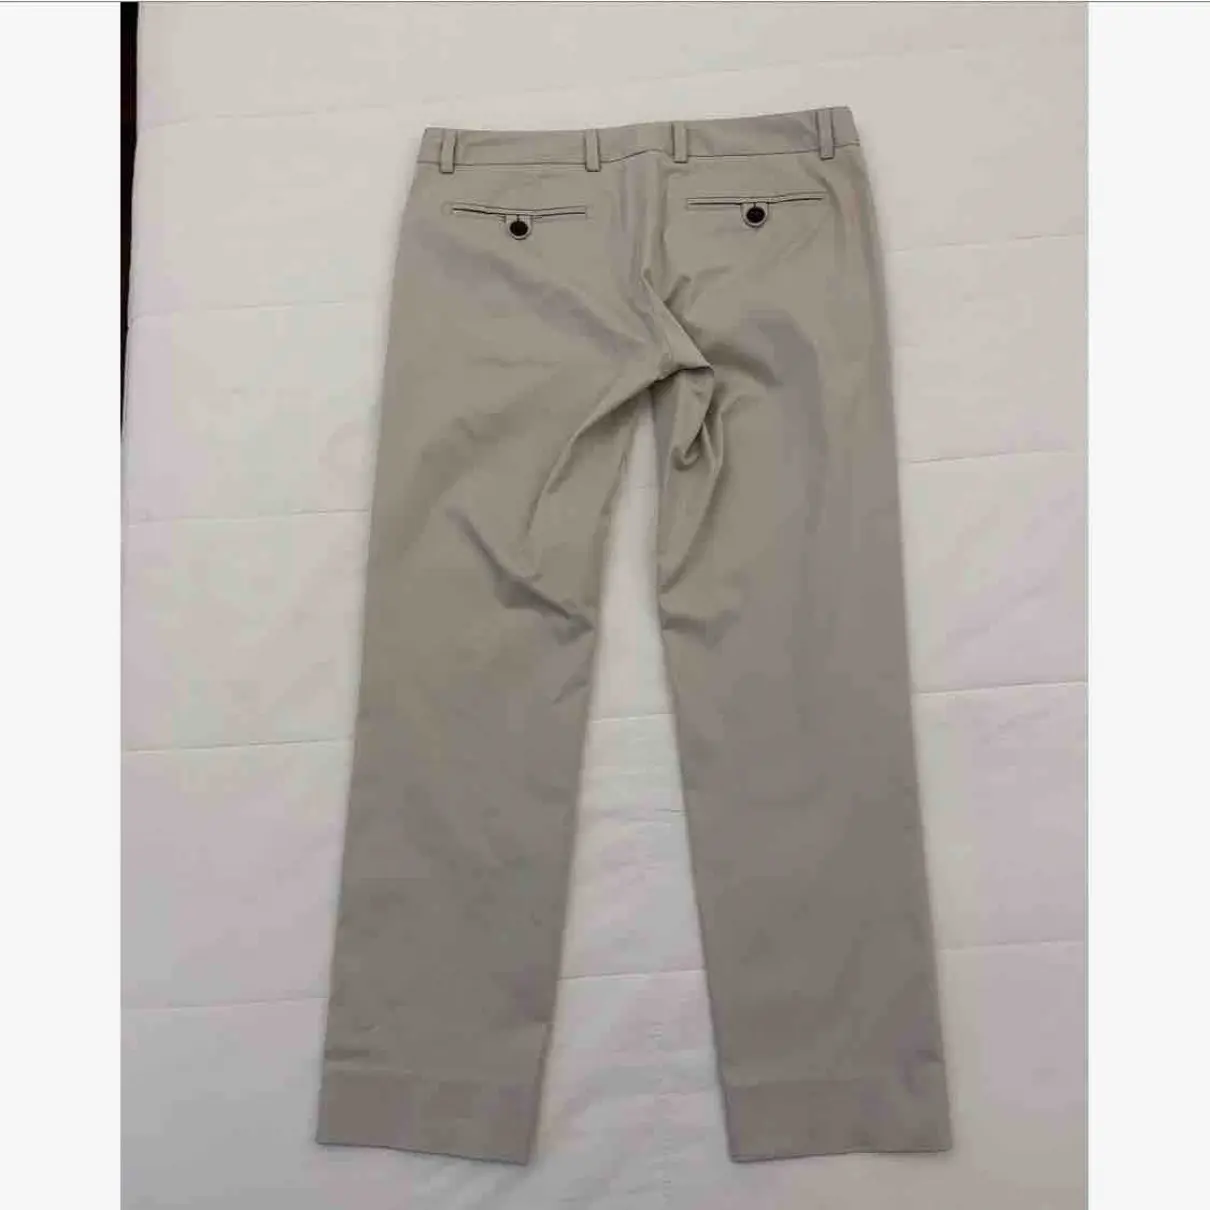 Buy Mauro Grifoni Trousers online